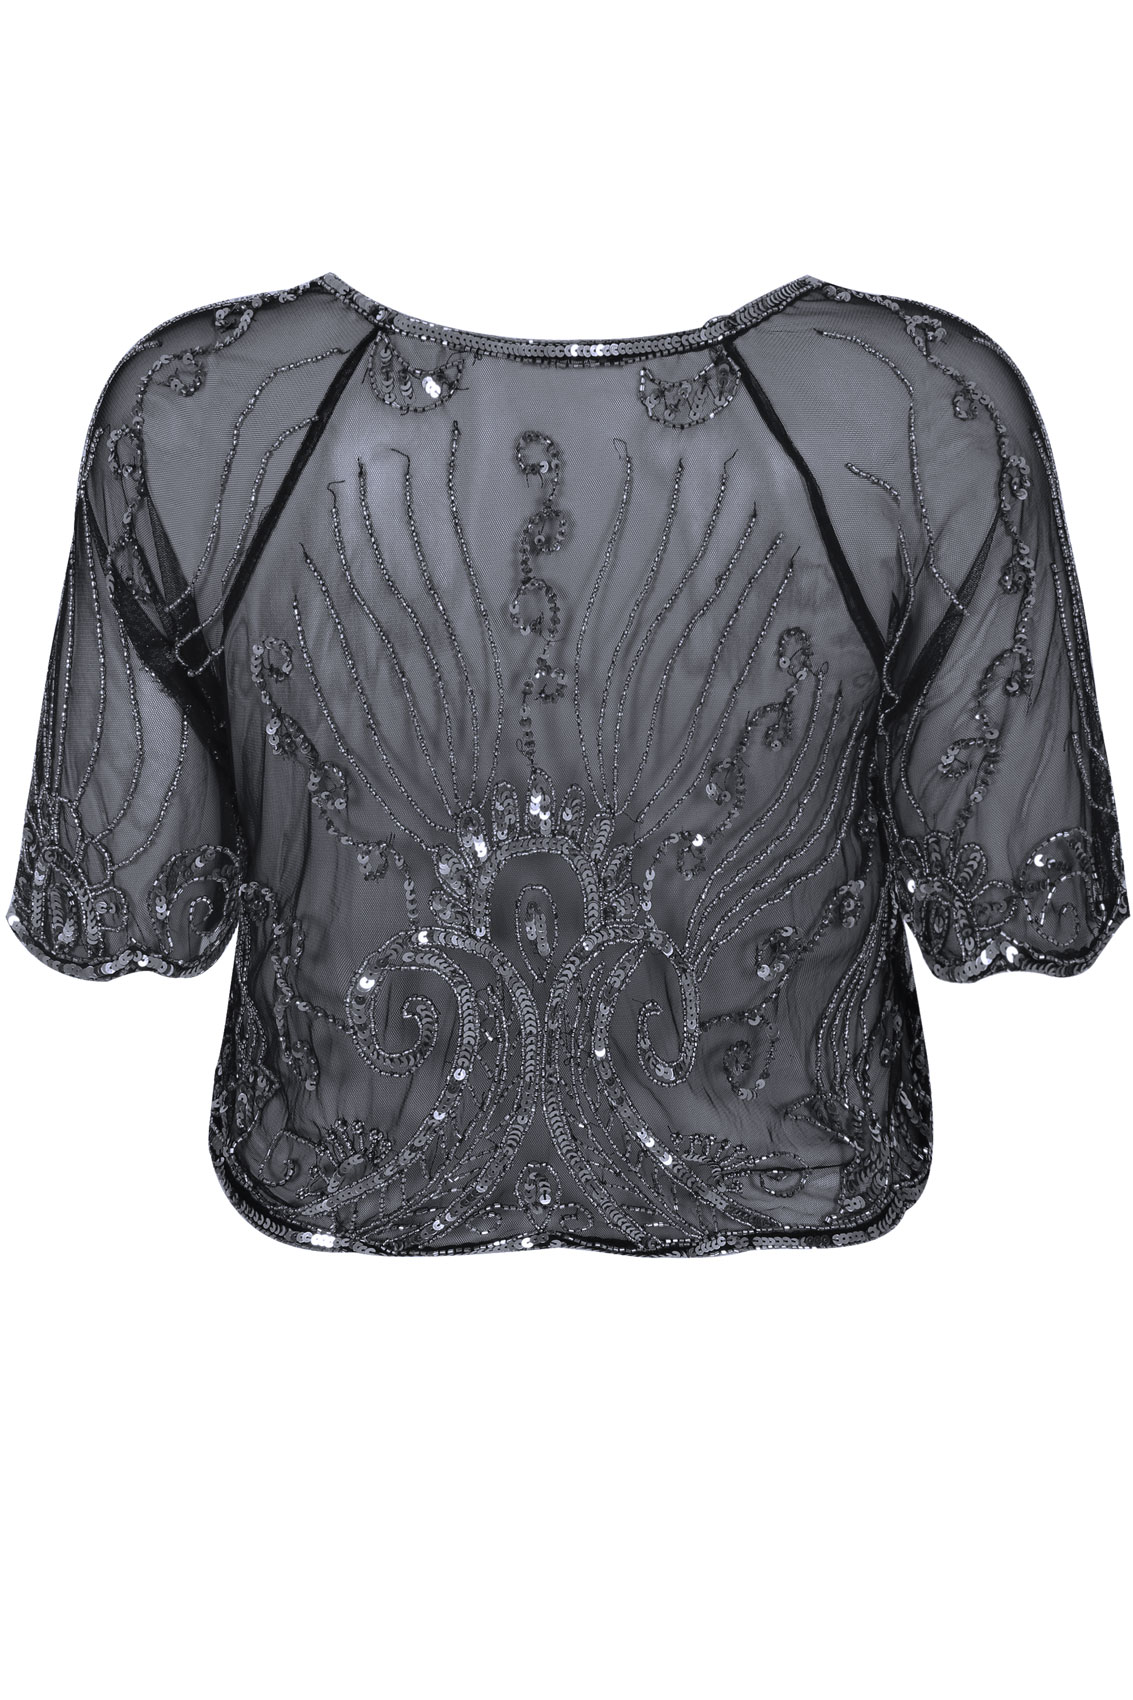 Black and Silver Sequin Embellished Mesh Shrug Plus Size 16 to 32